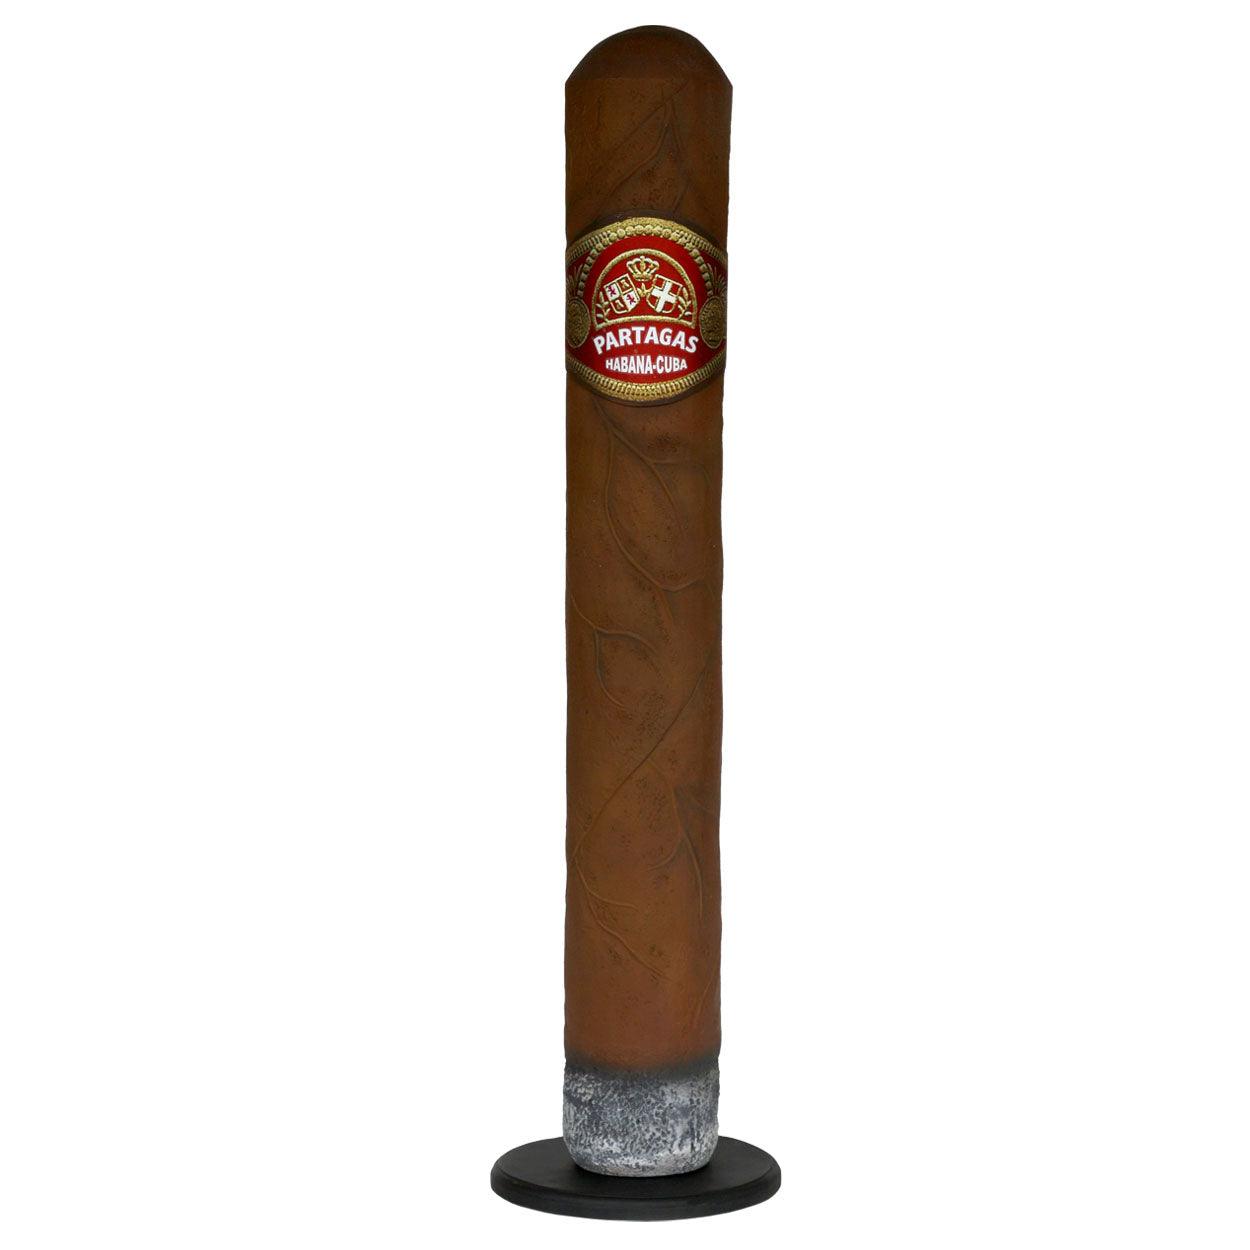 Cigar Prop Over Size Statue